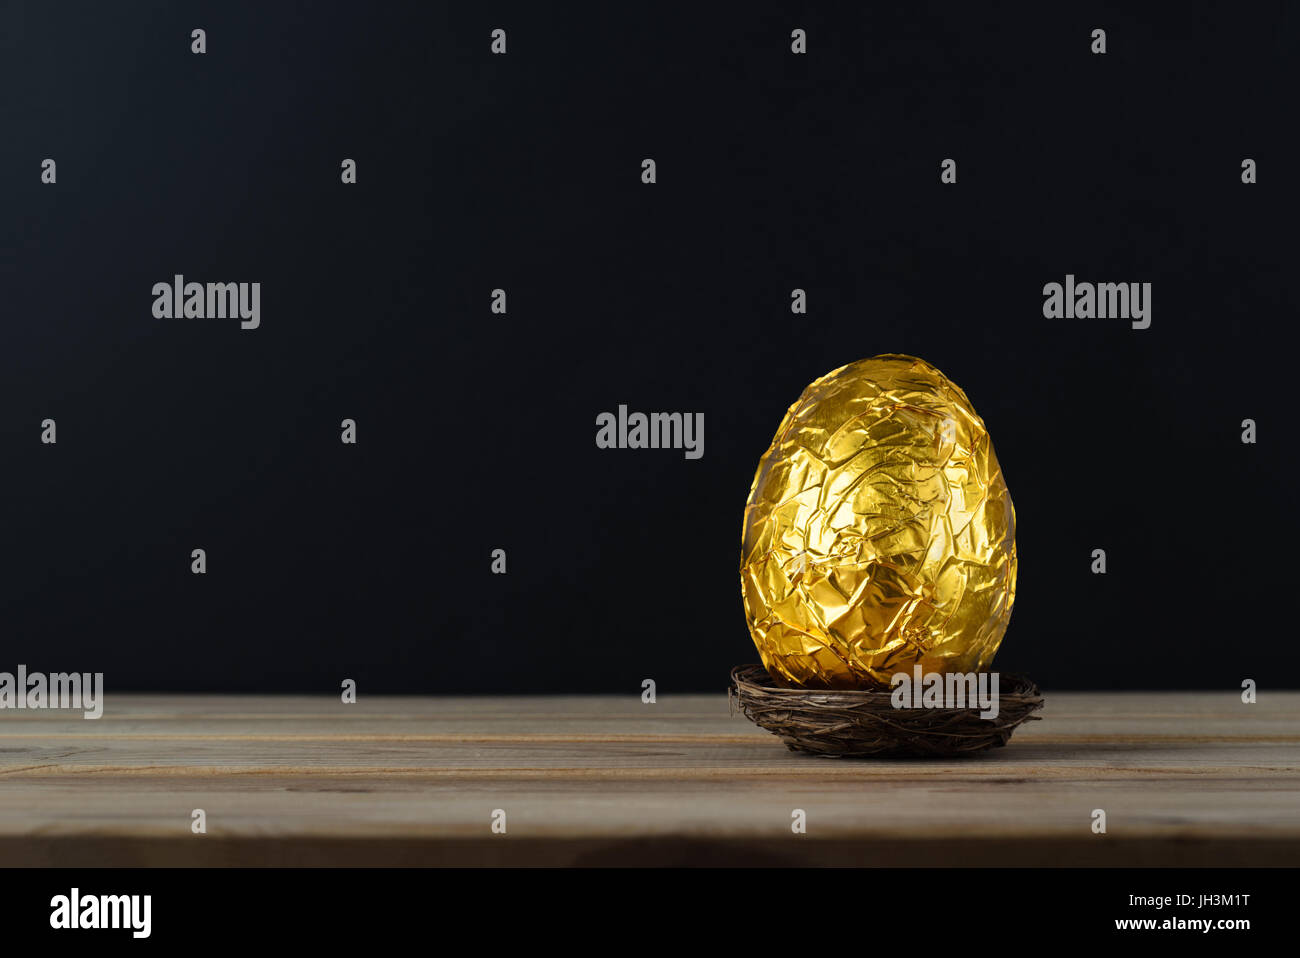 Easter concept.  A chocolate egg, wrapped in crinkled metallic gold foil.  Presented in a small nest on a wood plank table with black chalkboard backg Stock Photo